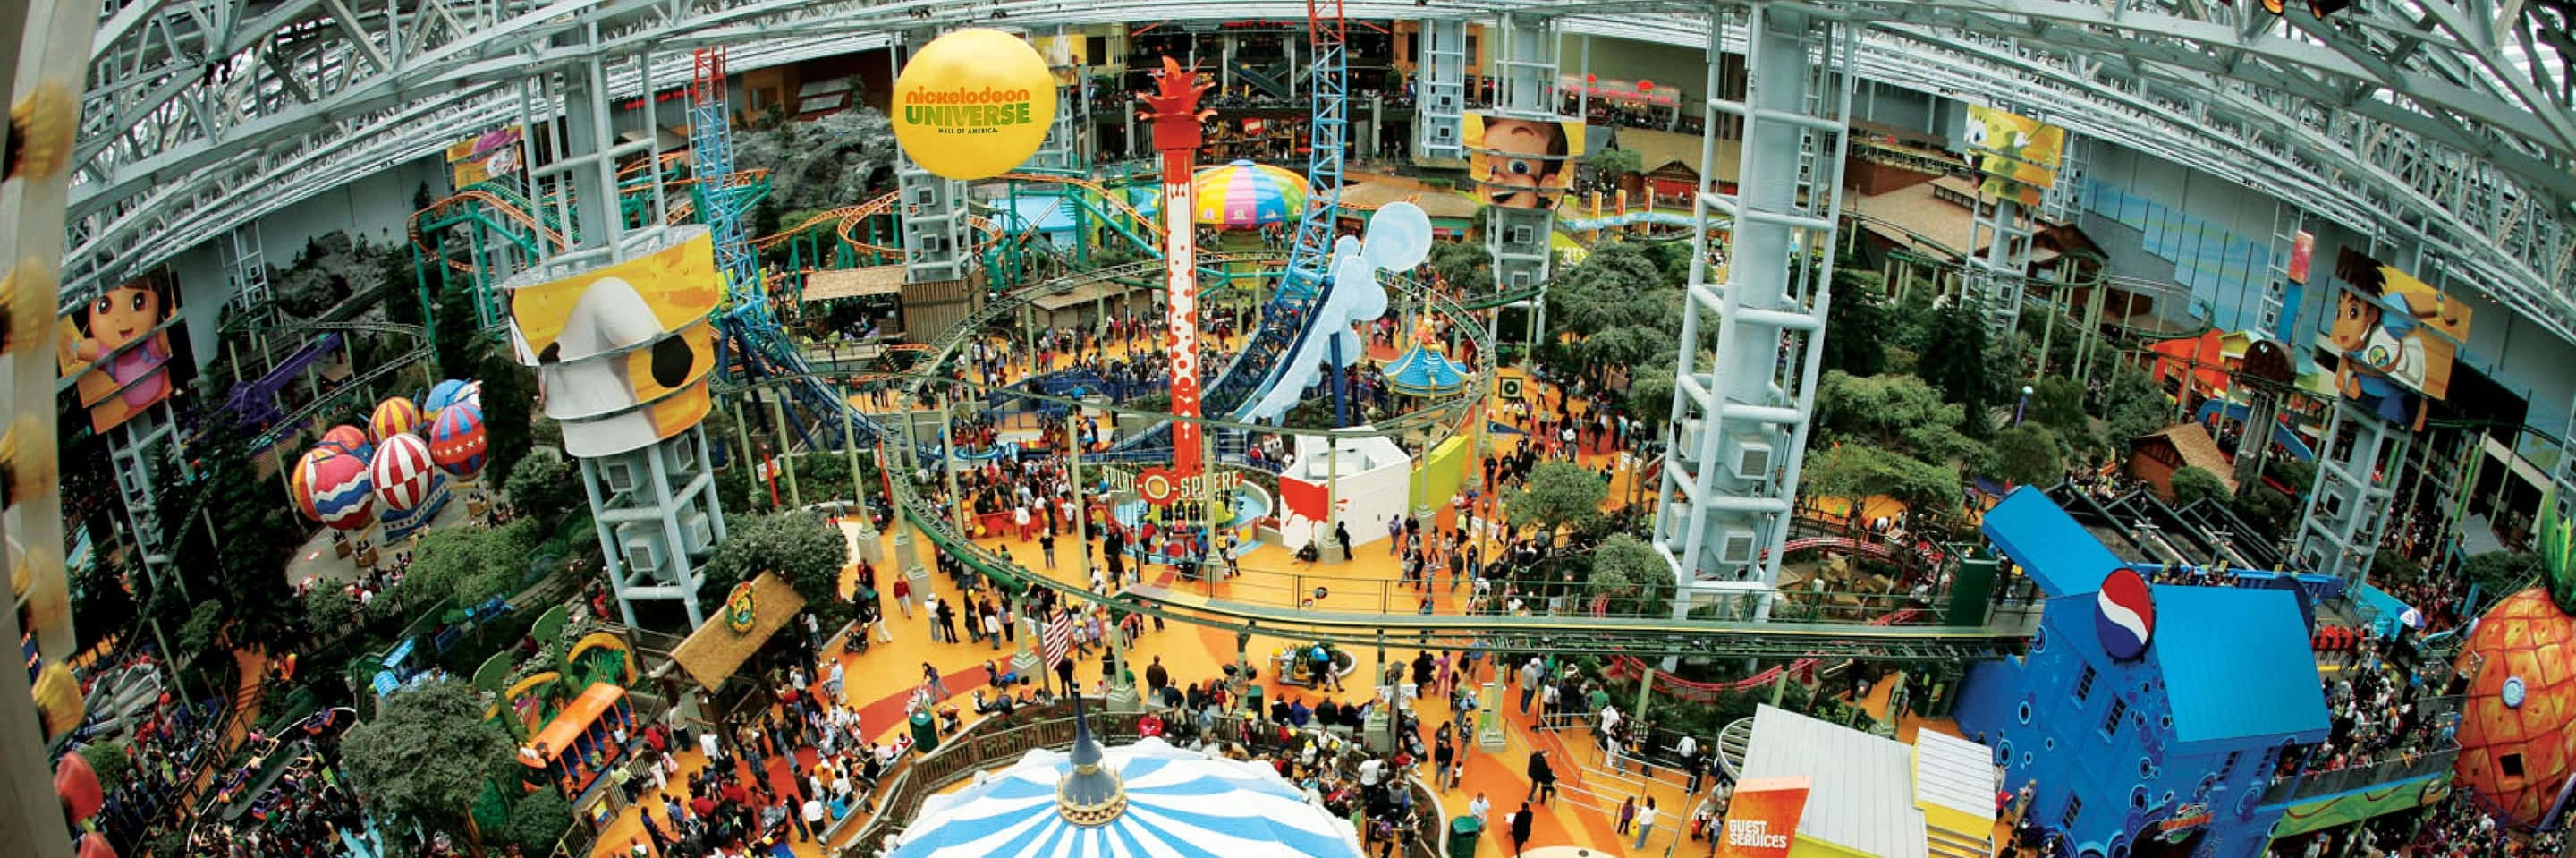 Visit Mall of America for the Shopping Destination of a Lifetime